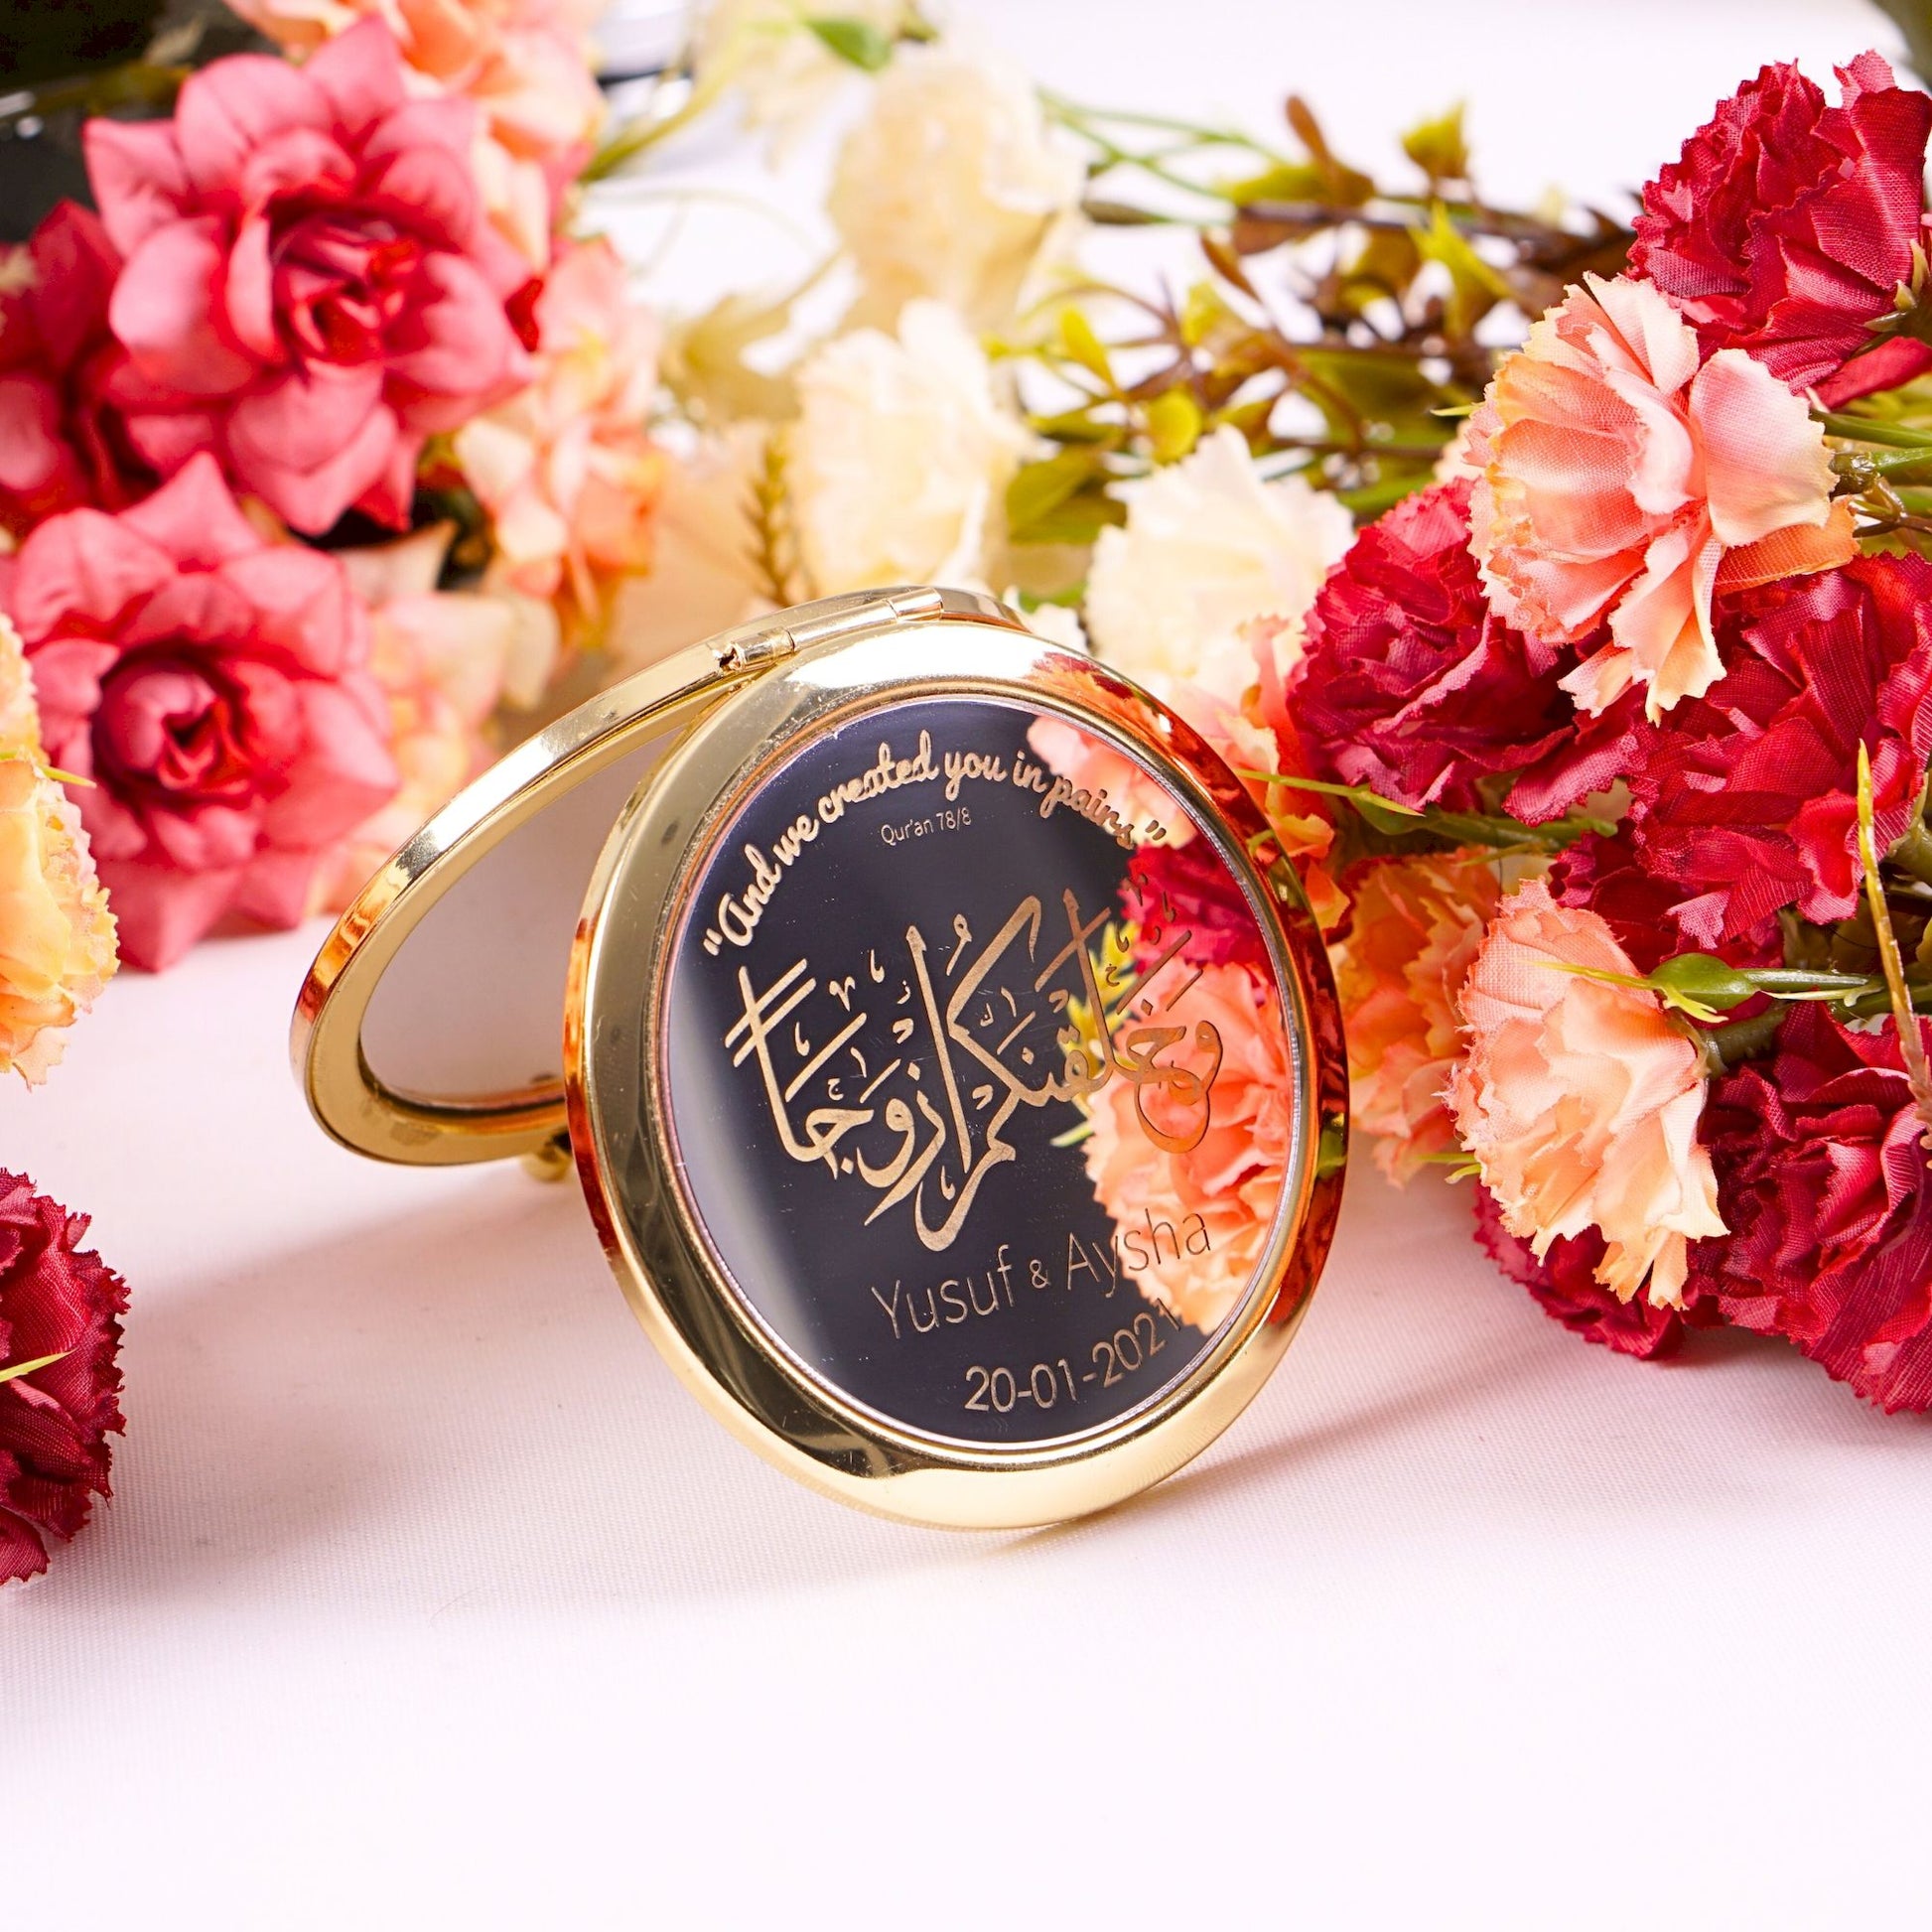 Personalized Wedding Favor Black Mini Makeup Mirror in Gift Box - Islamic Elite Favors is a handmade gift shop offering a wide variety of unique and personalized gifts for all occasions. Whether you're looking for the perfect Ramadan, Eid, Hajj, wedding gift or something special for a birthday, baby shower or anniversary, we have something for everyone. High quality, made with love.